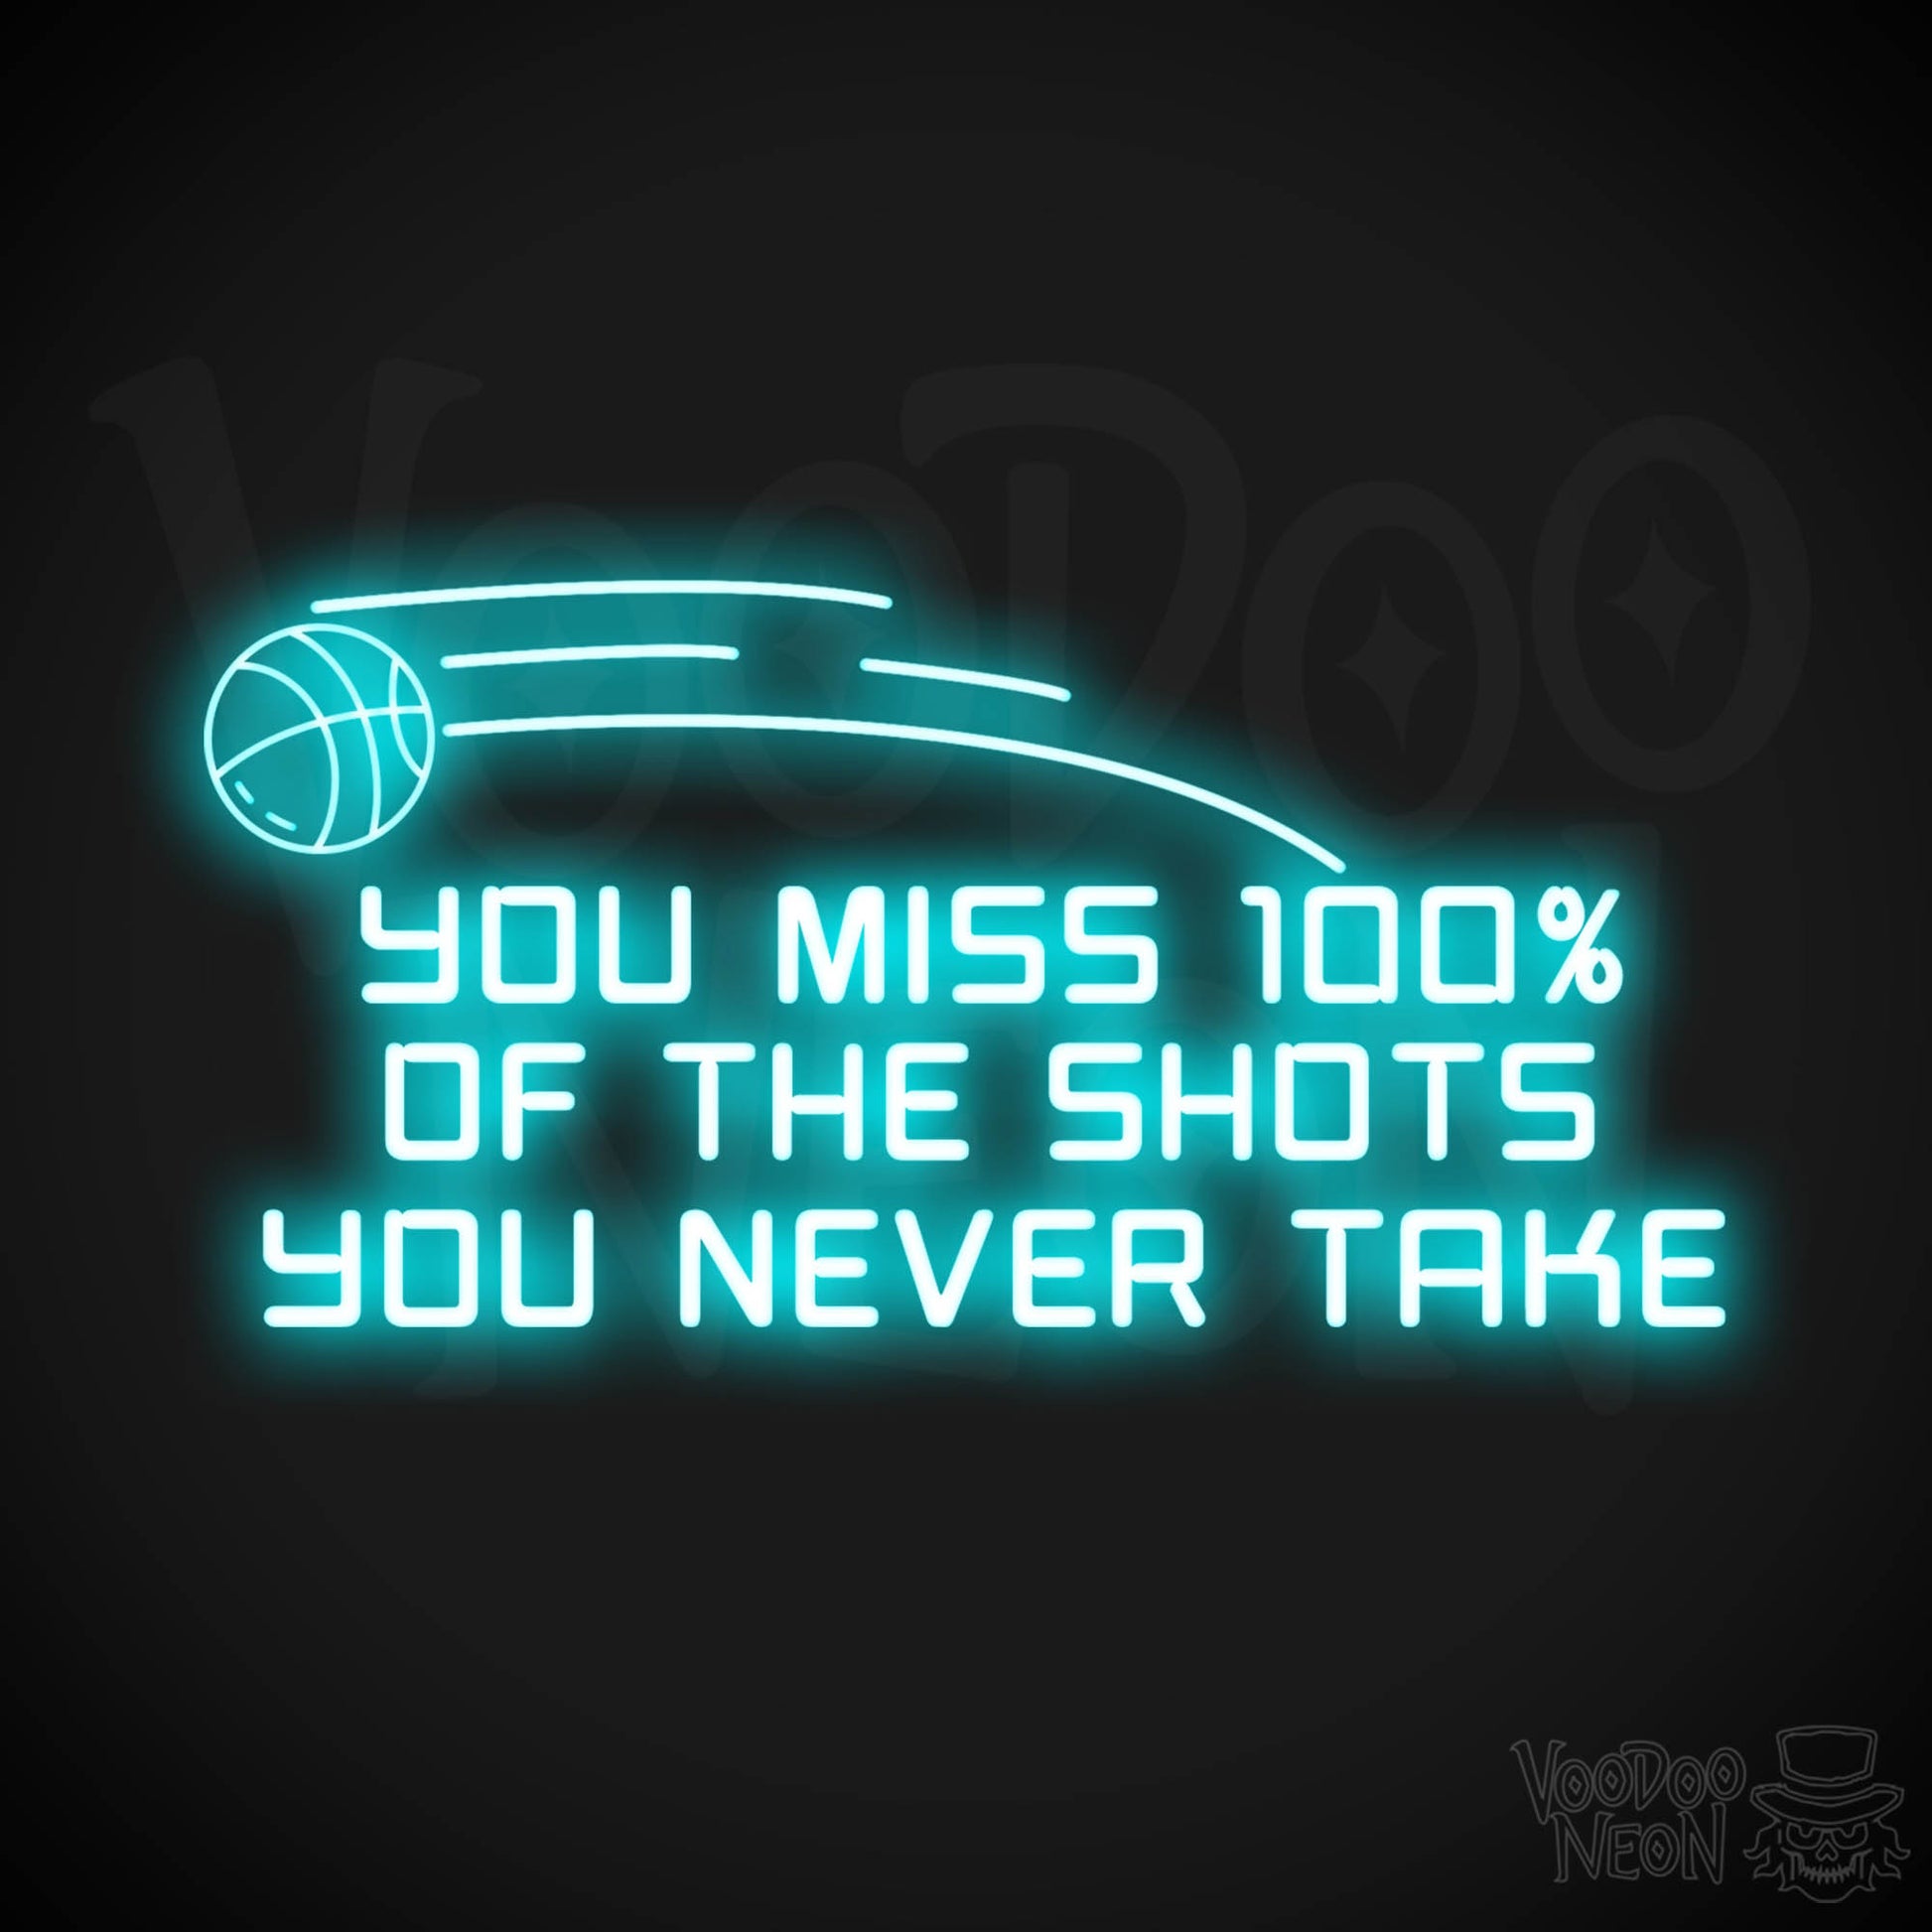 You Miss 100% of the Shots You Never Take Neon Sign - Neon Wall Art - Inspirational Signs - Color Ice Blue